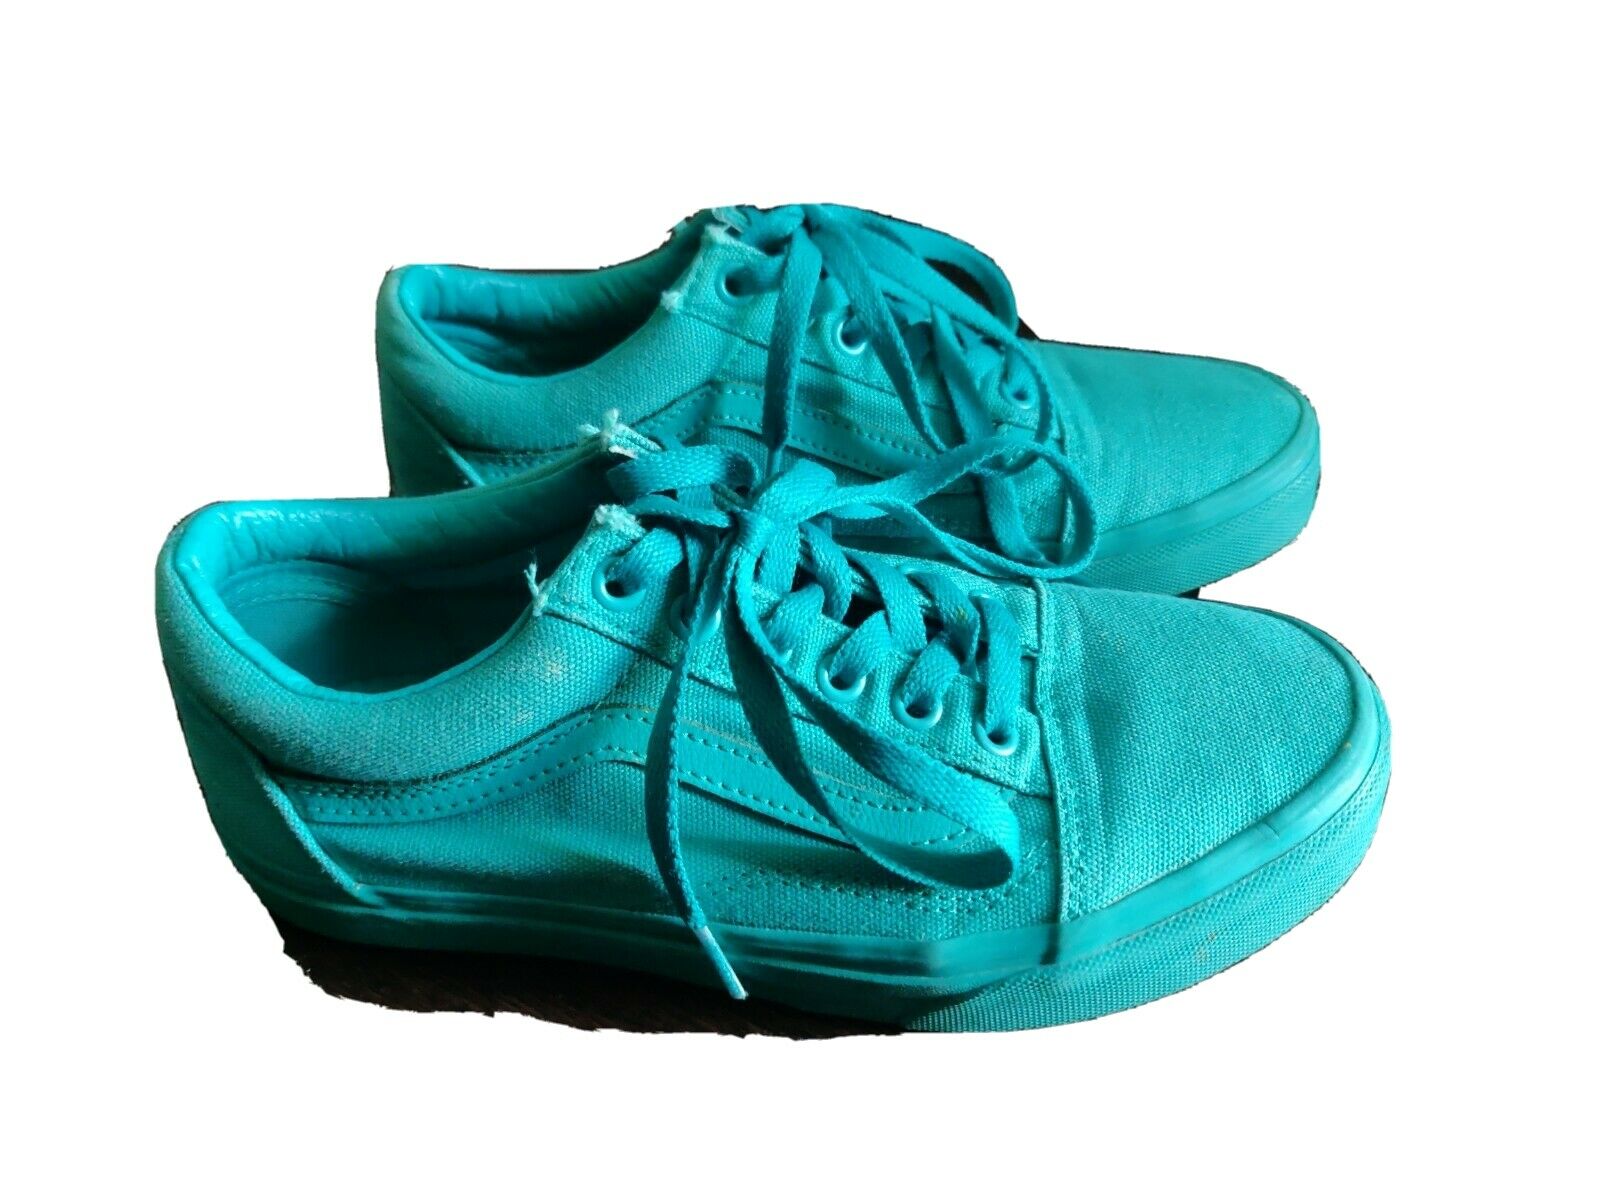 VANS Sneakers Women's Size 7.5 Teal Blue Turquoise Canvas Skate Walking Shoes